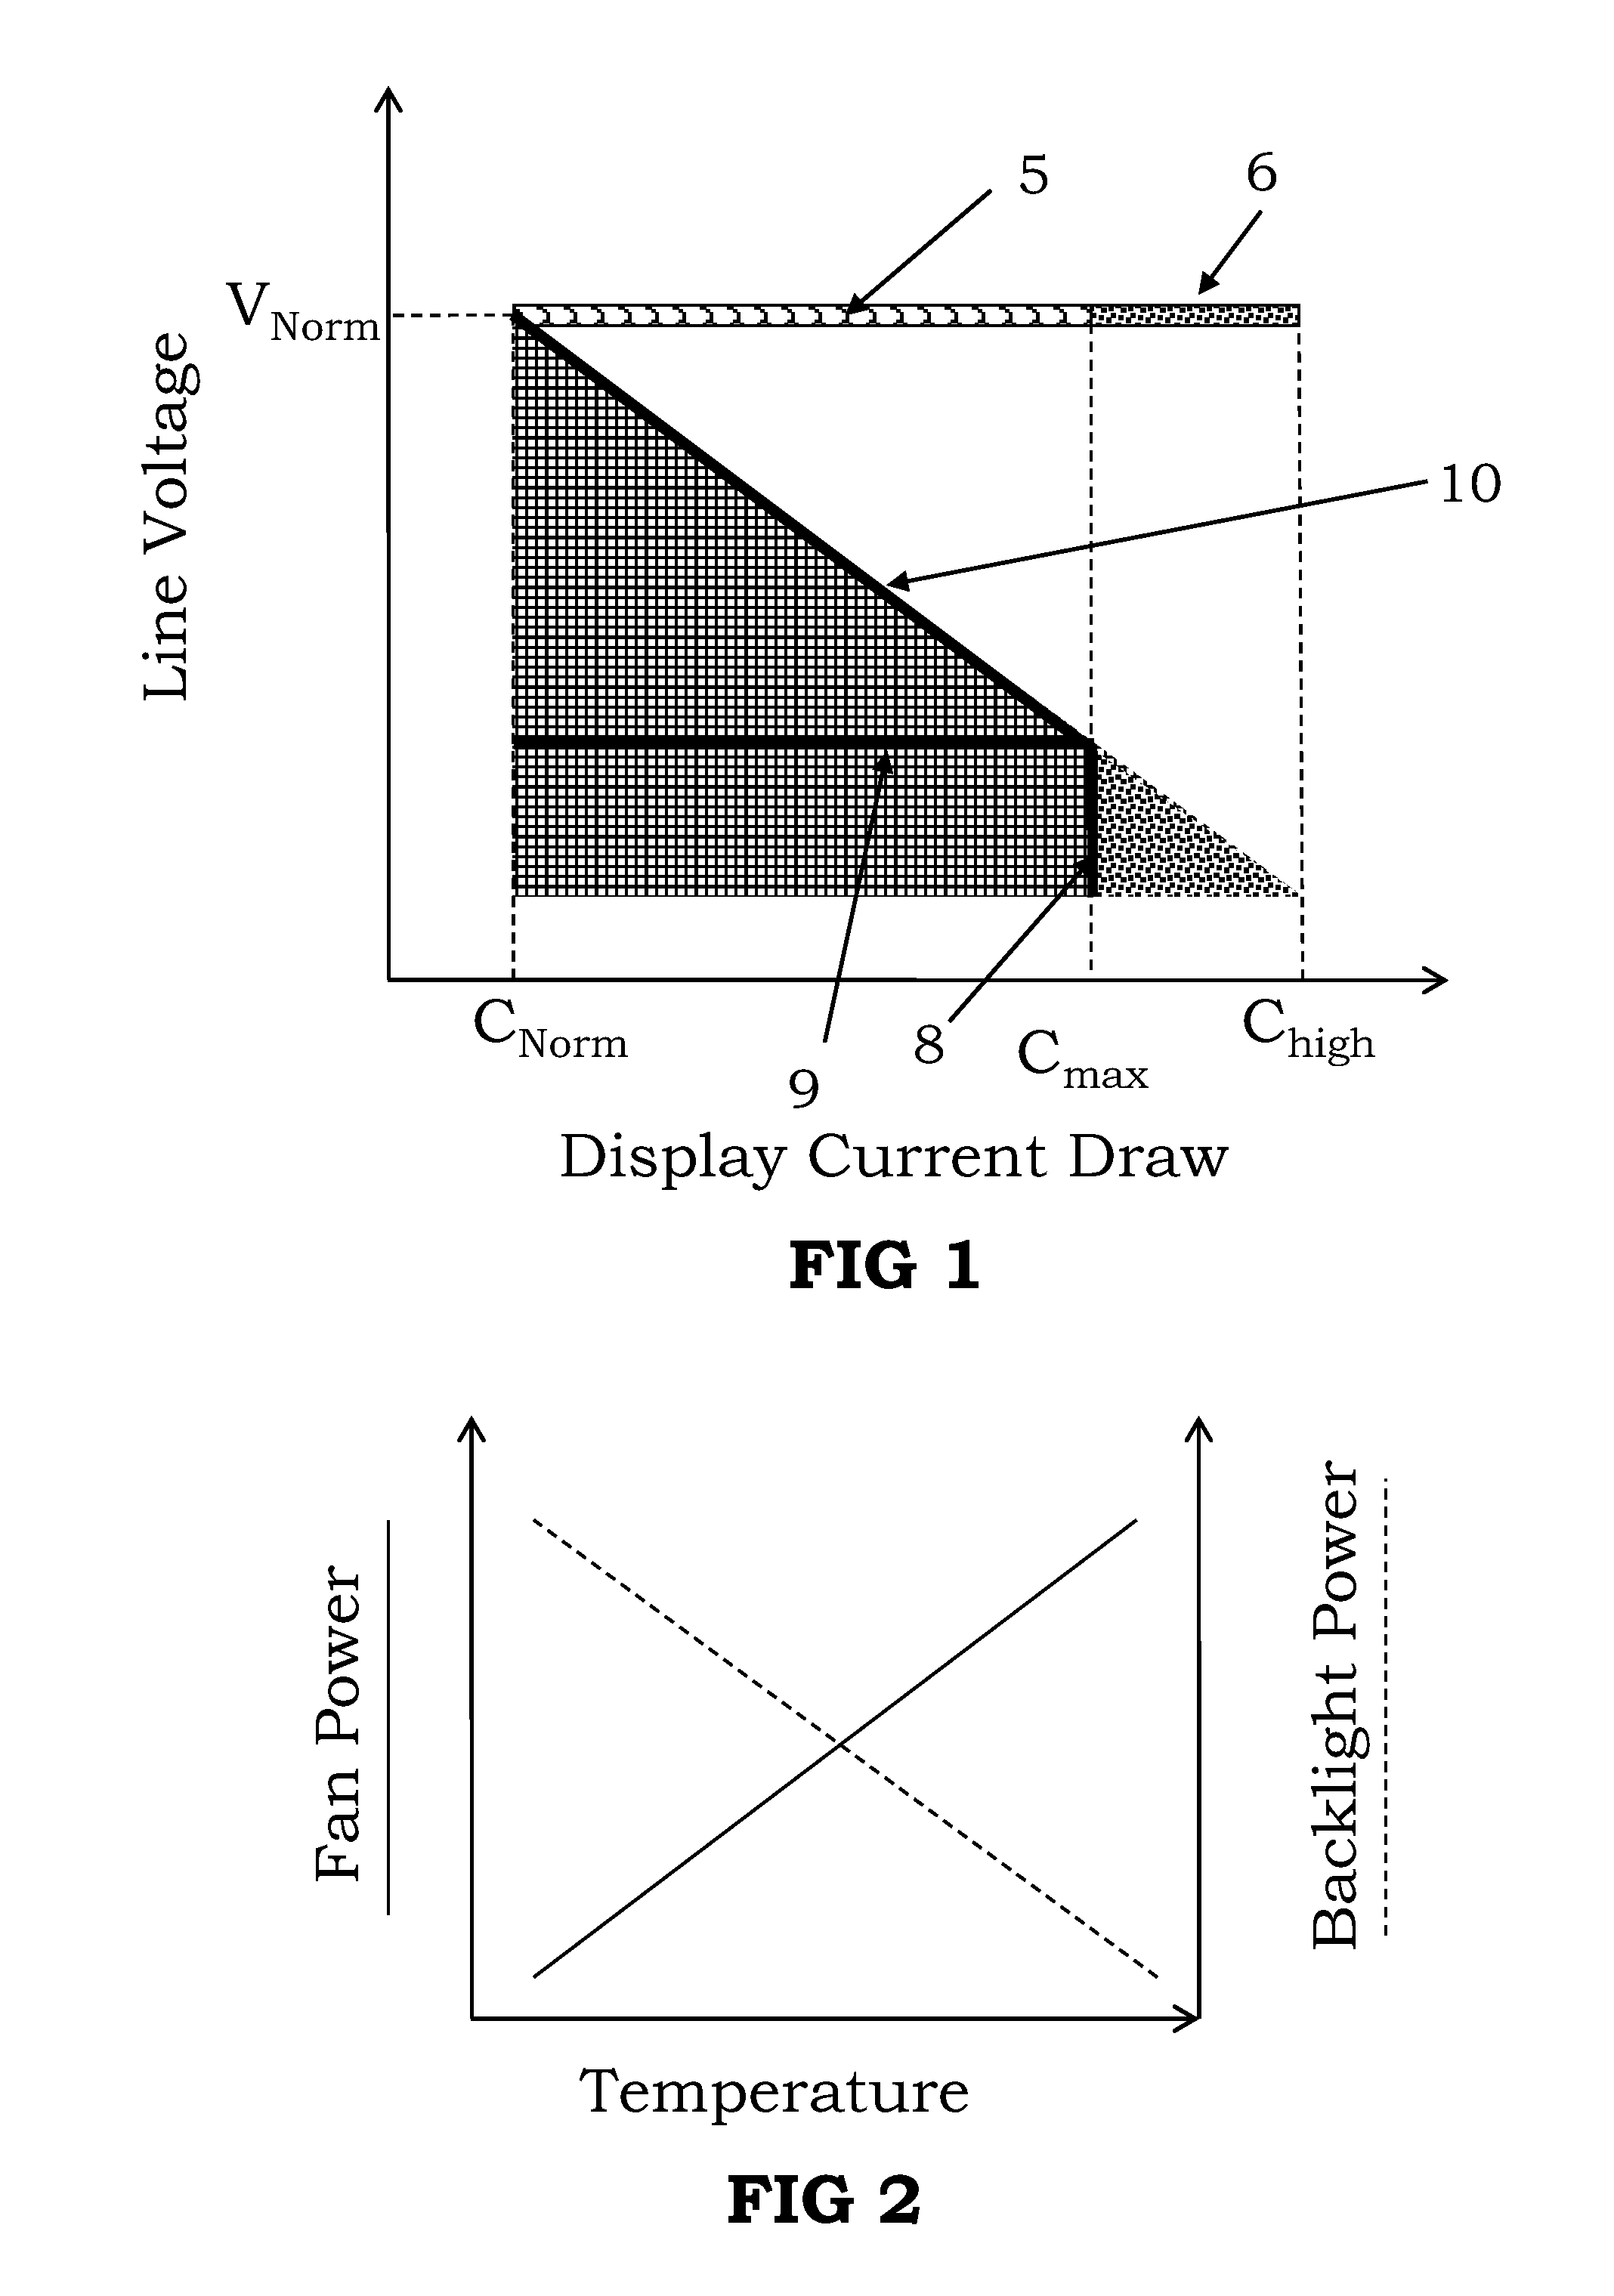 System and method for controlling the operation parameters response to current draw